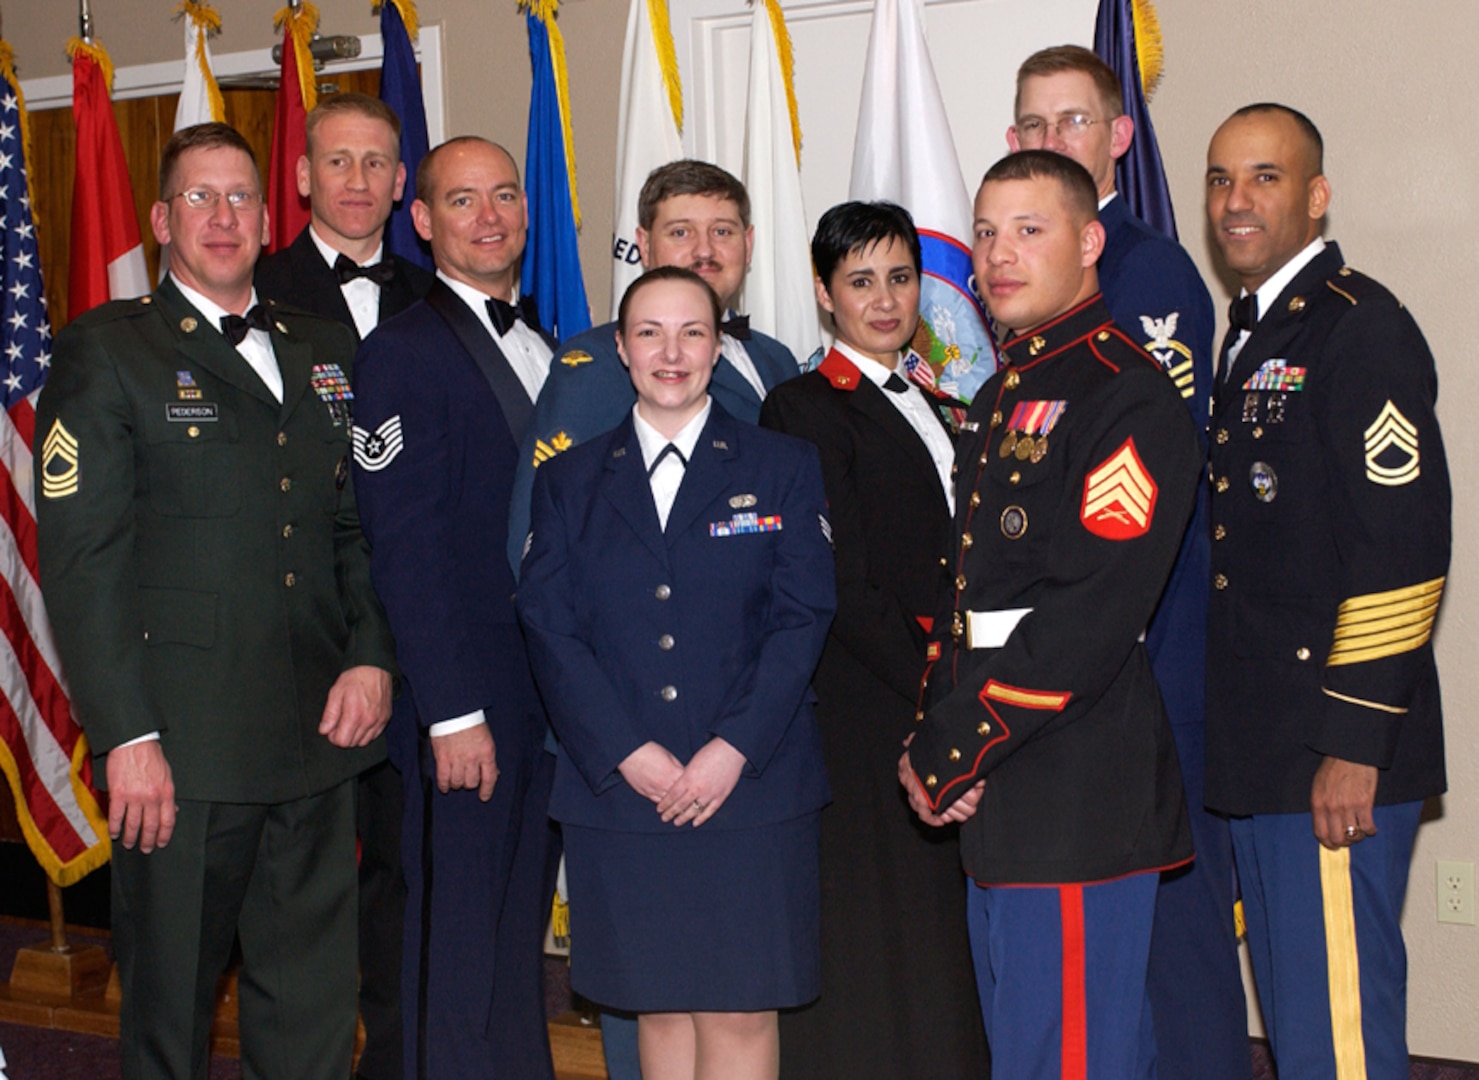 Members of every American and Canadian military service attended the first joint enlisted dining-out held by the North American Aerospace Defense Command and United States Northern Command at Peterson Air Force Base, Colo., on March 18. Photo by Sgt. 1st Class Gail Braymen 